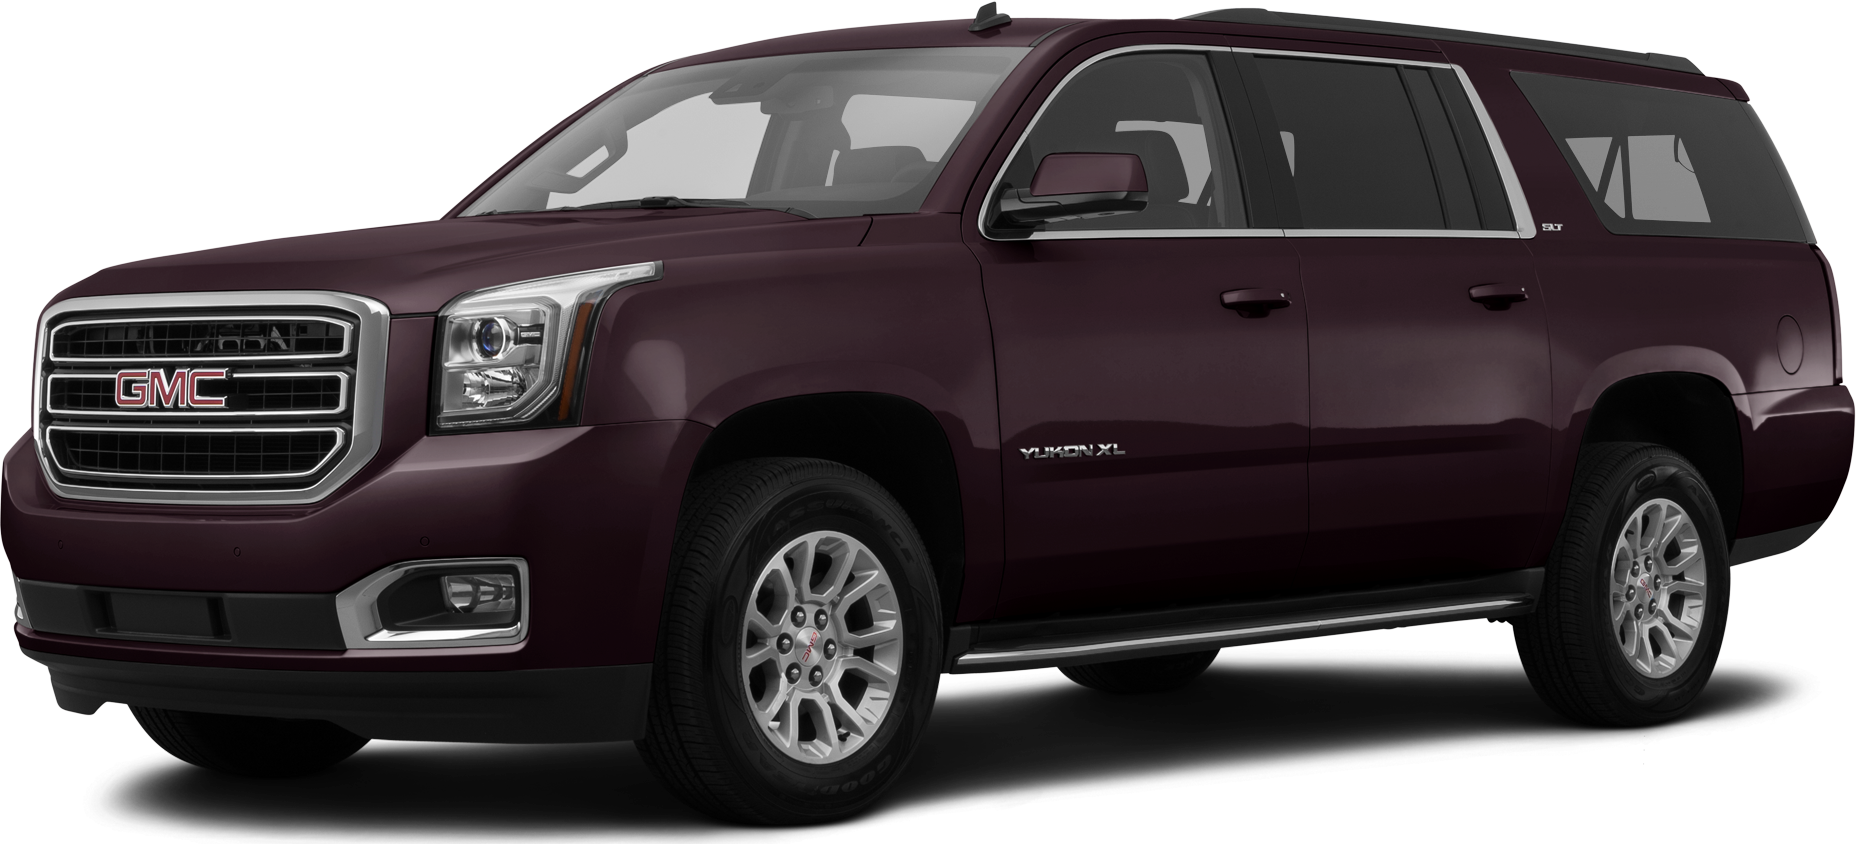 2015 Gmc Yukon Xl Price Value Ratings And Reviews Kelley Blue Book 1607